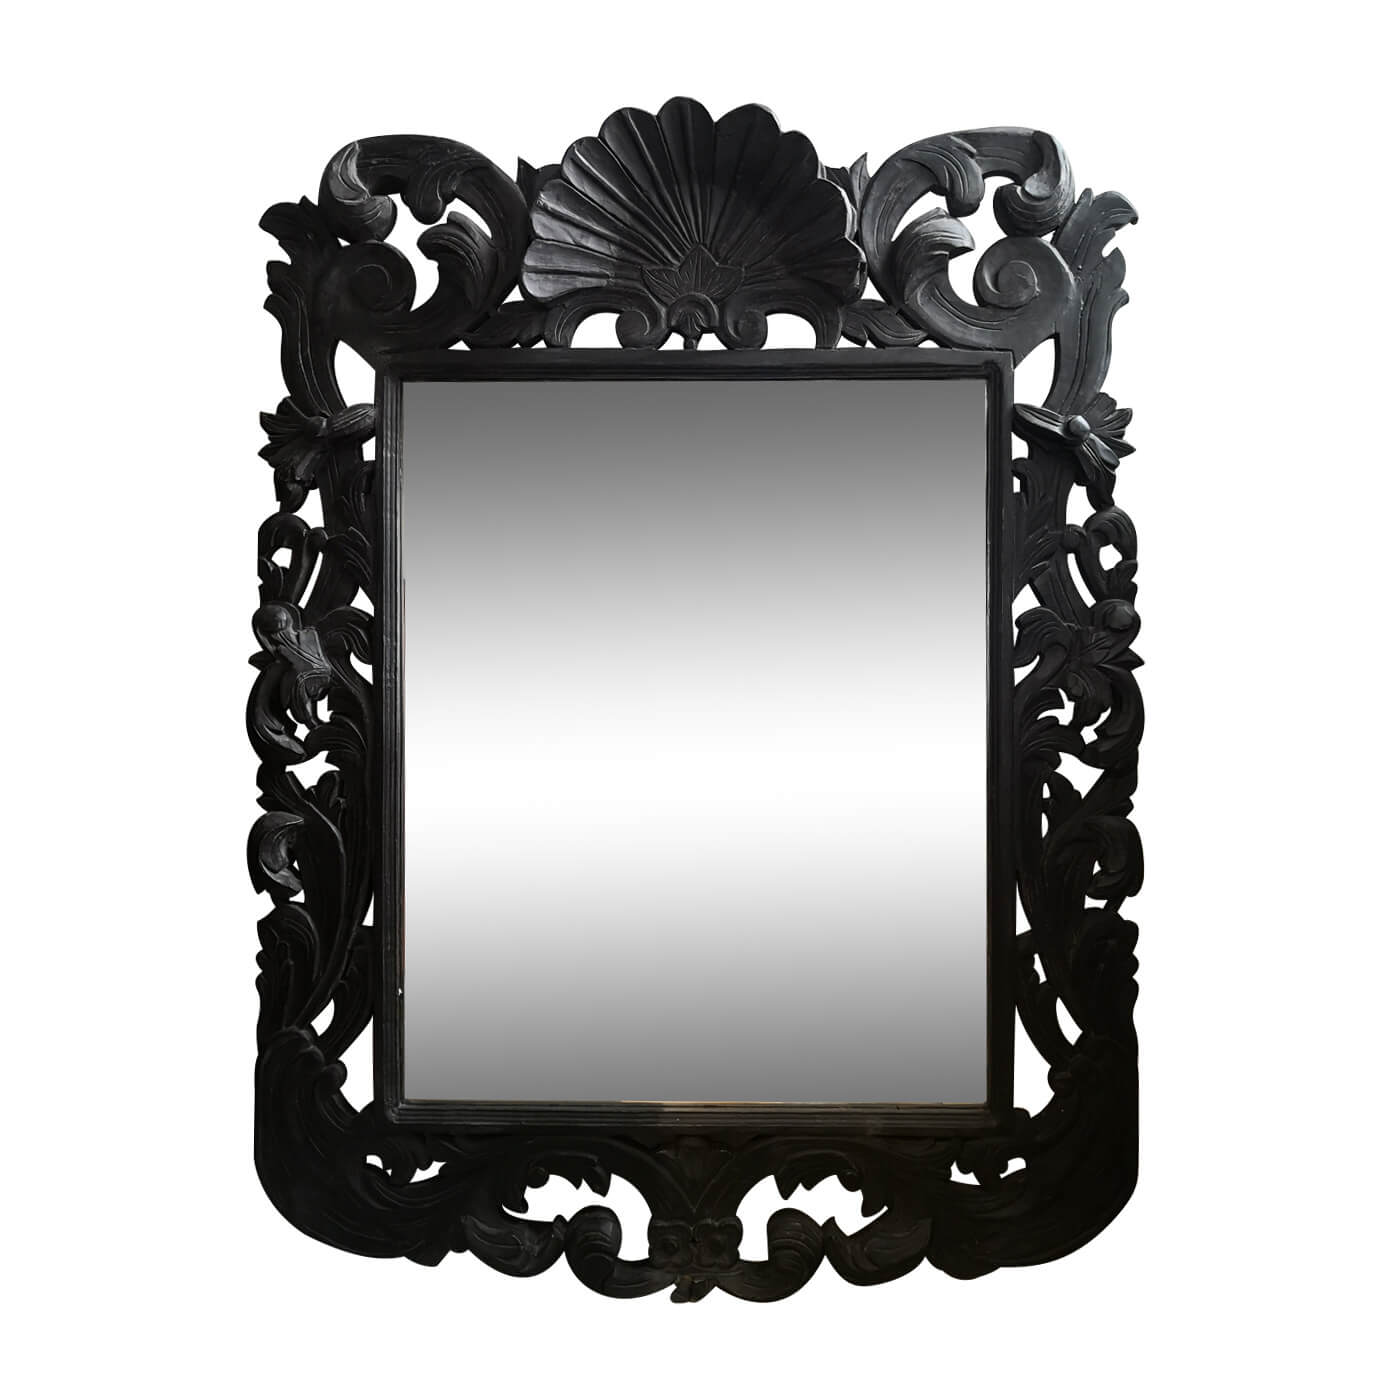 Mirror with ornate carved wood frame